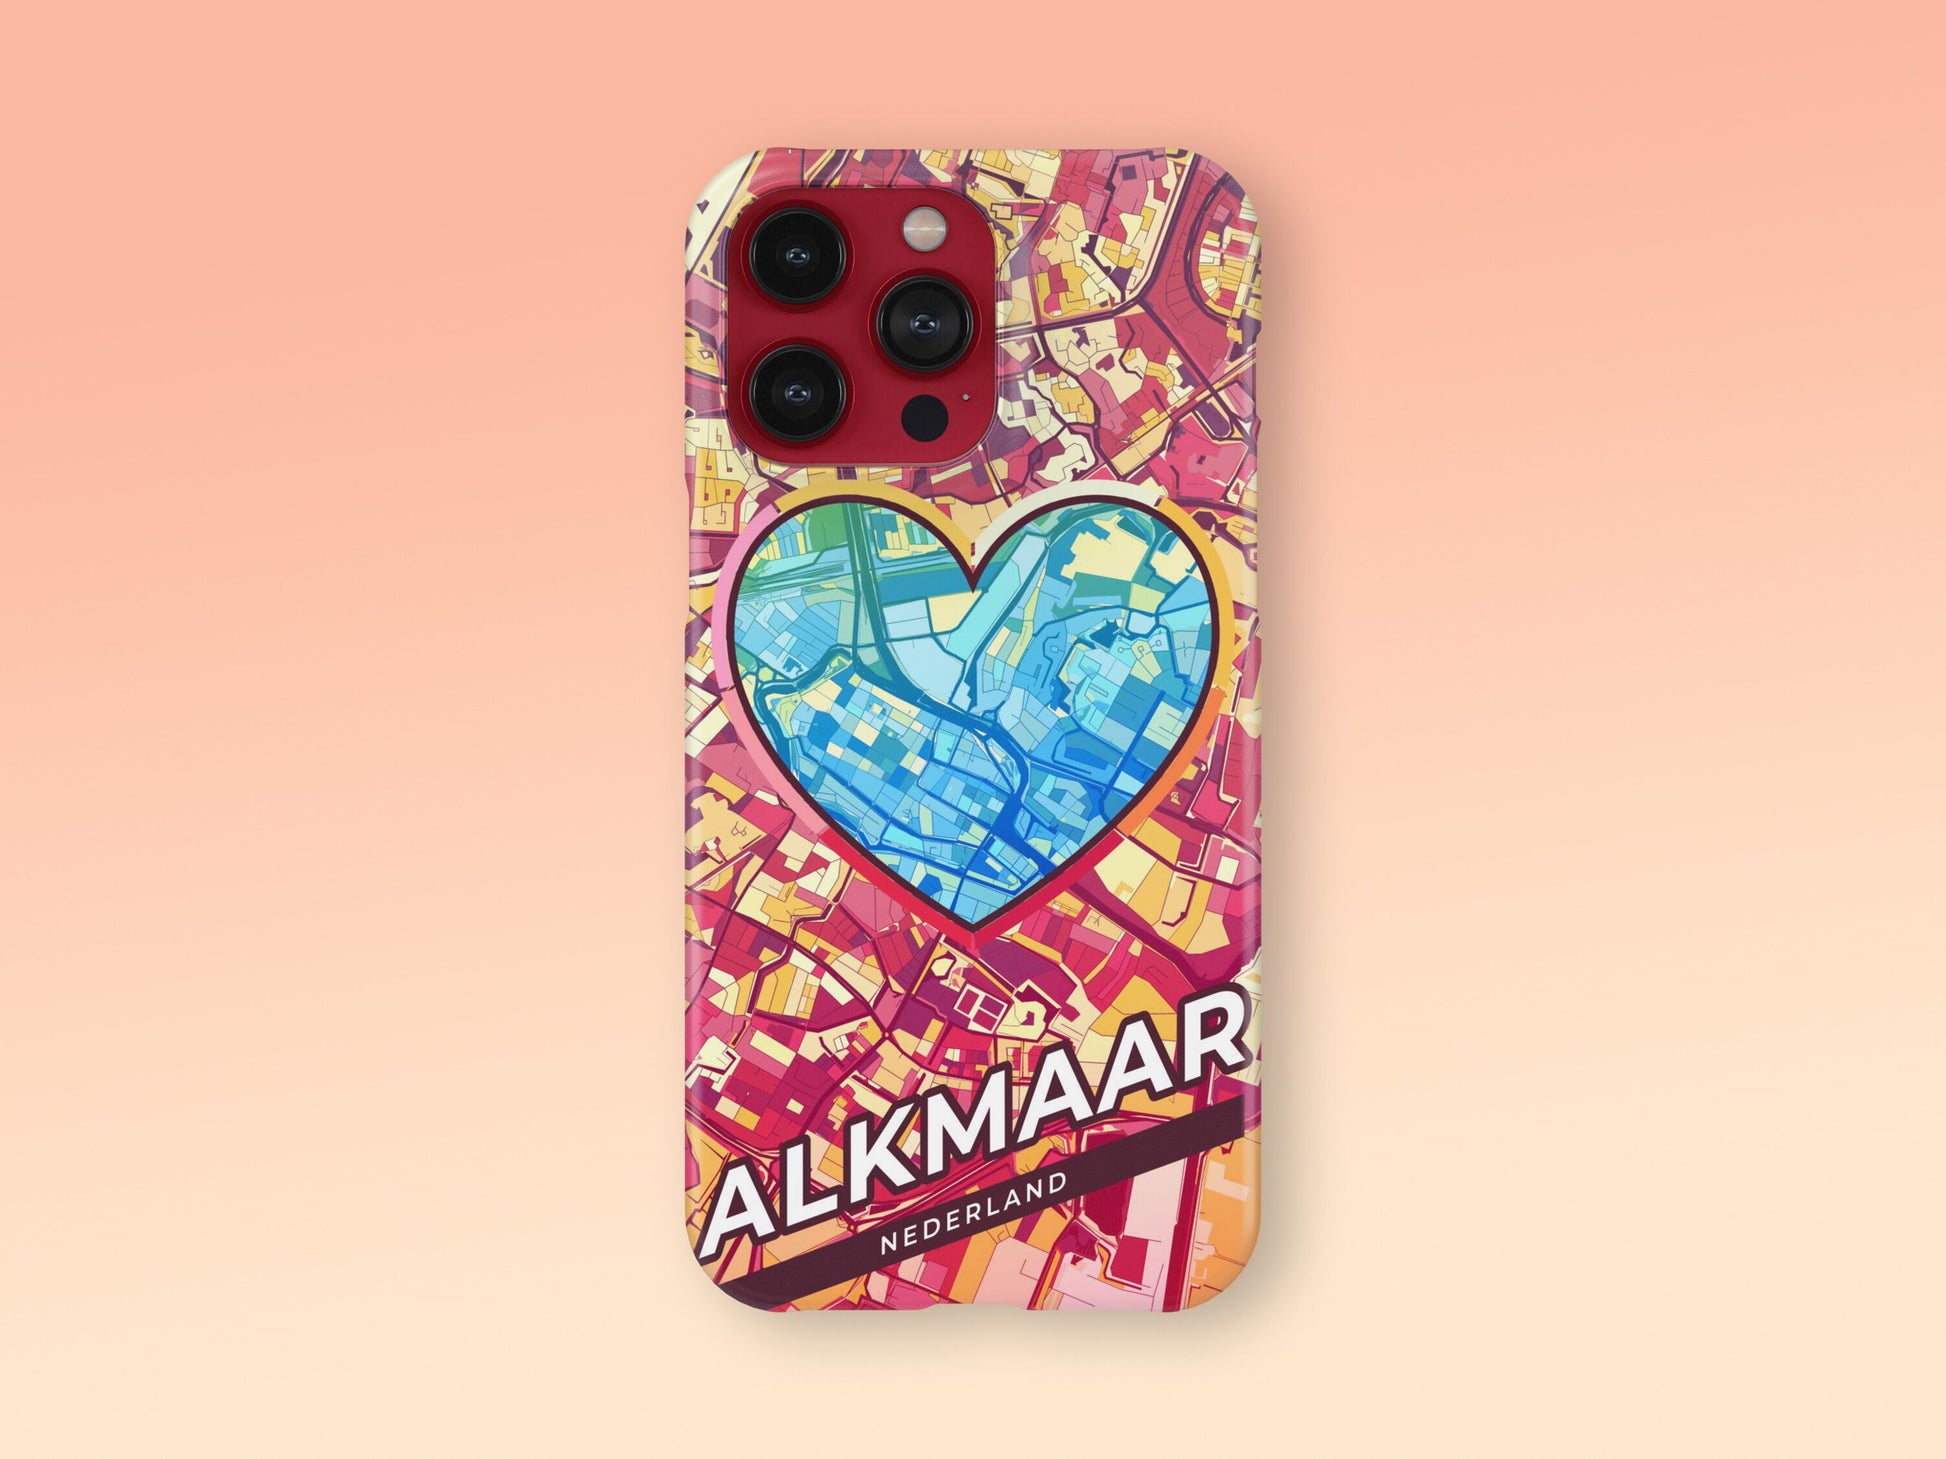 Alkmaar Netherlands slim phone case with colorful icon. Birthday, wedding or housewarming gift. Couple match cases. 2